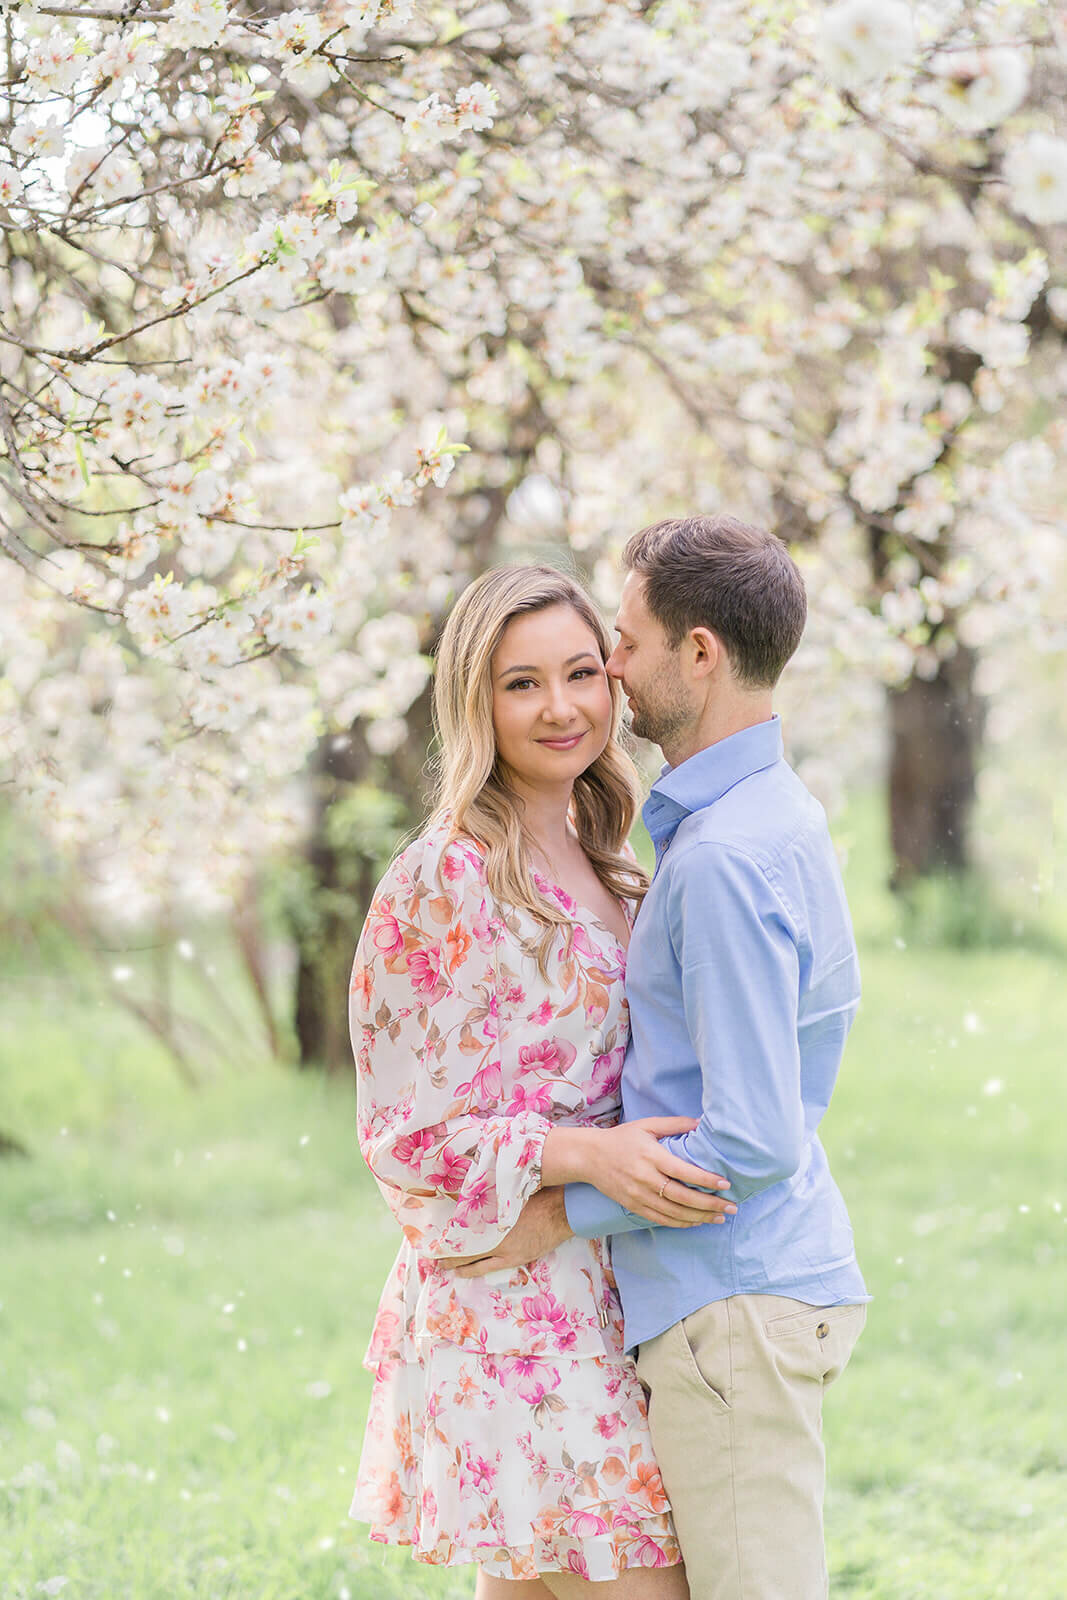 Capture couples love amid Australia's almond blossoms with Hikari Lifestyle Photography in South Australia.